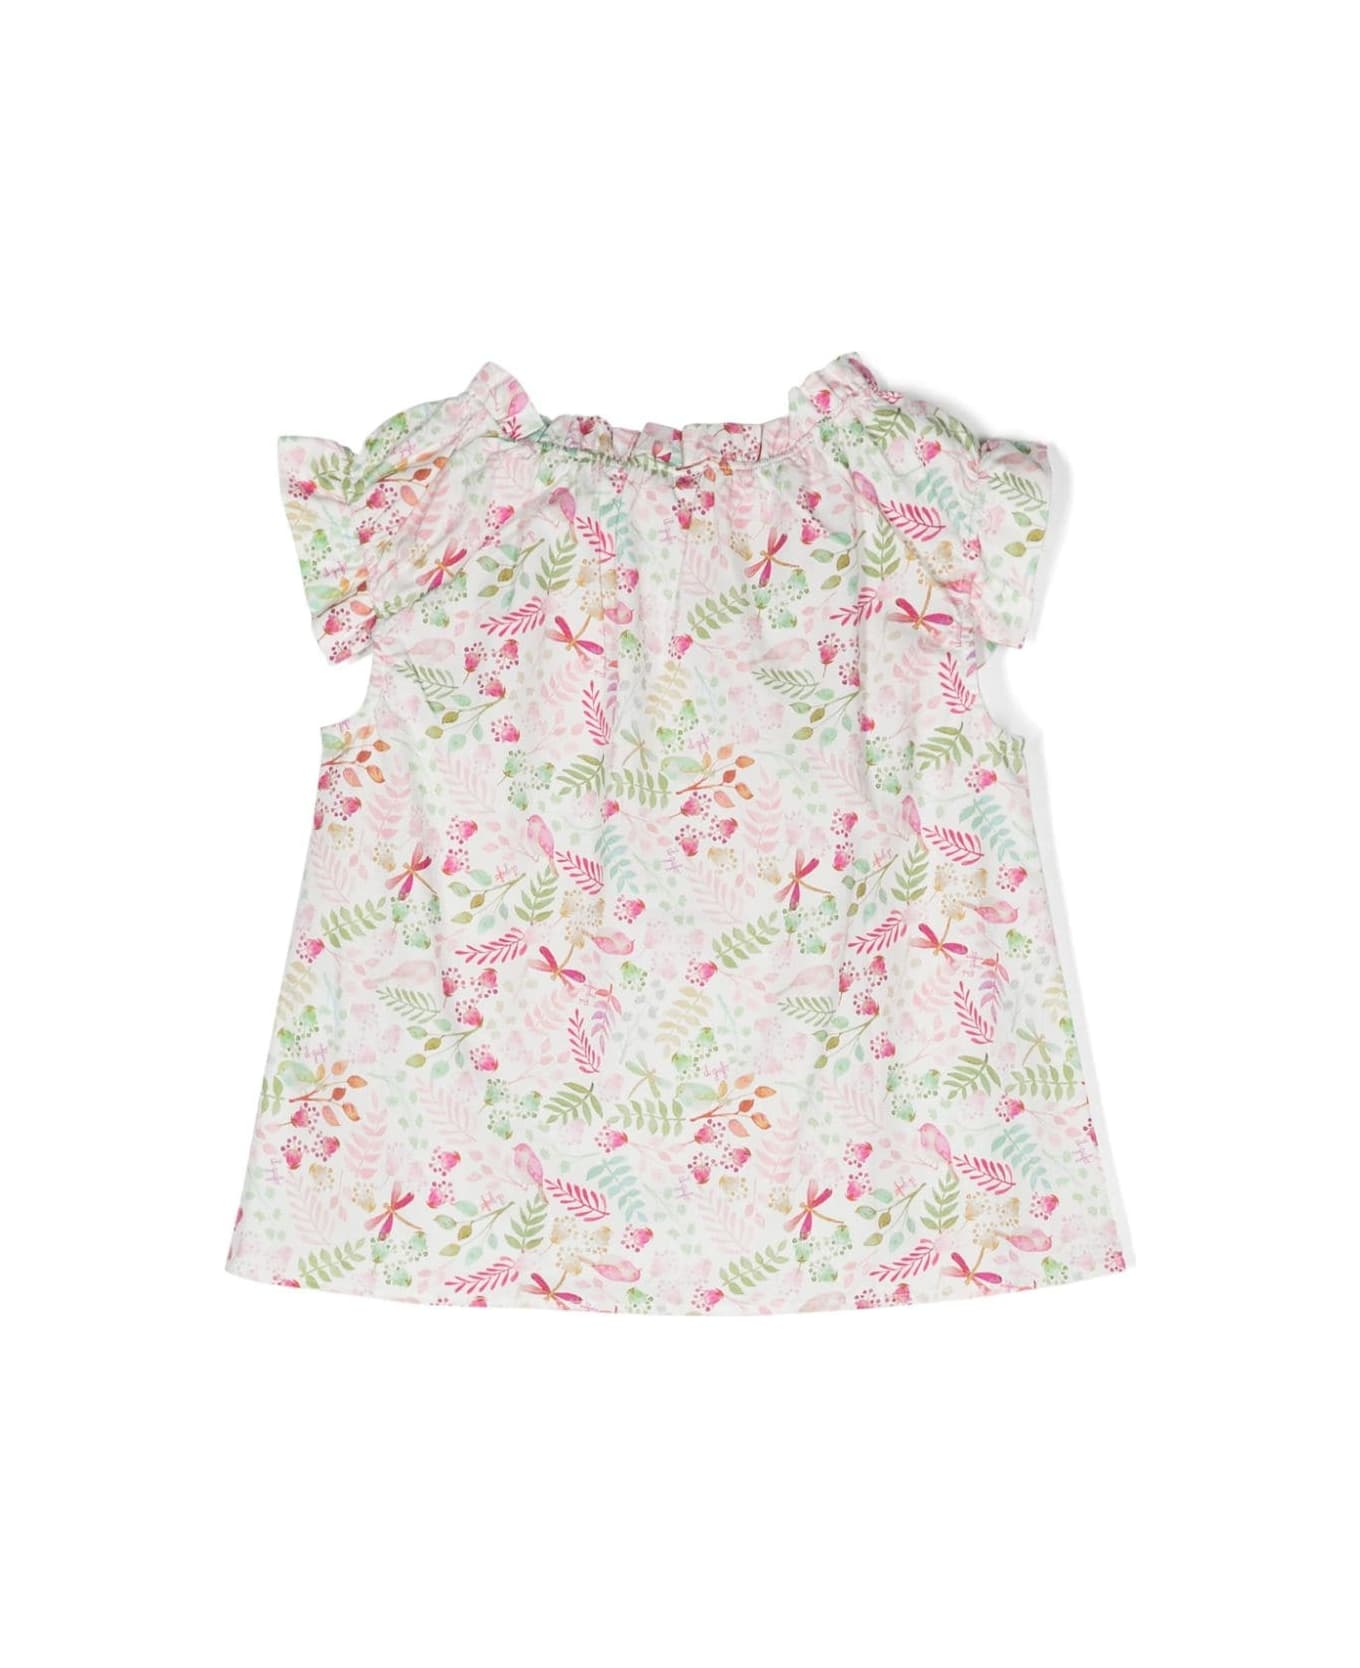 Il Gufo Top With Exclusive Flower Print In Pink Pepper Colour - Pink トップス